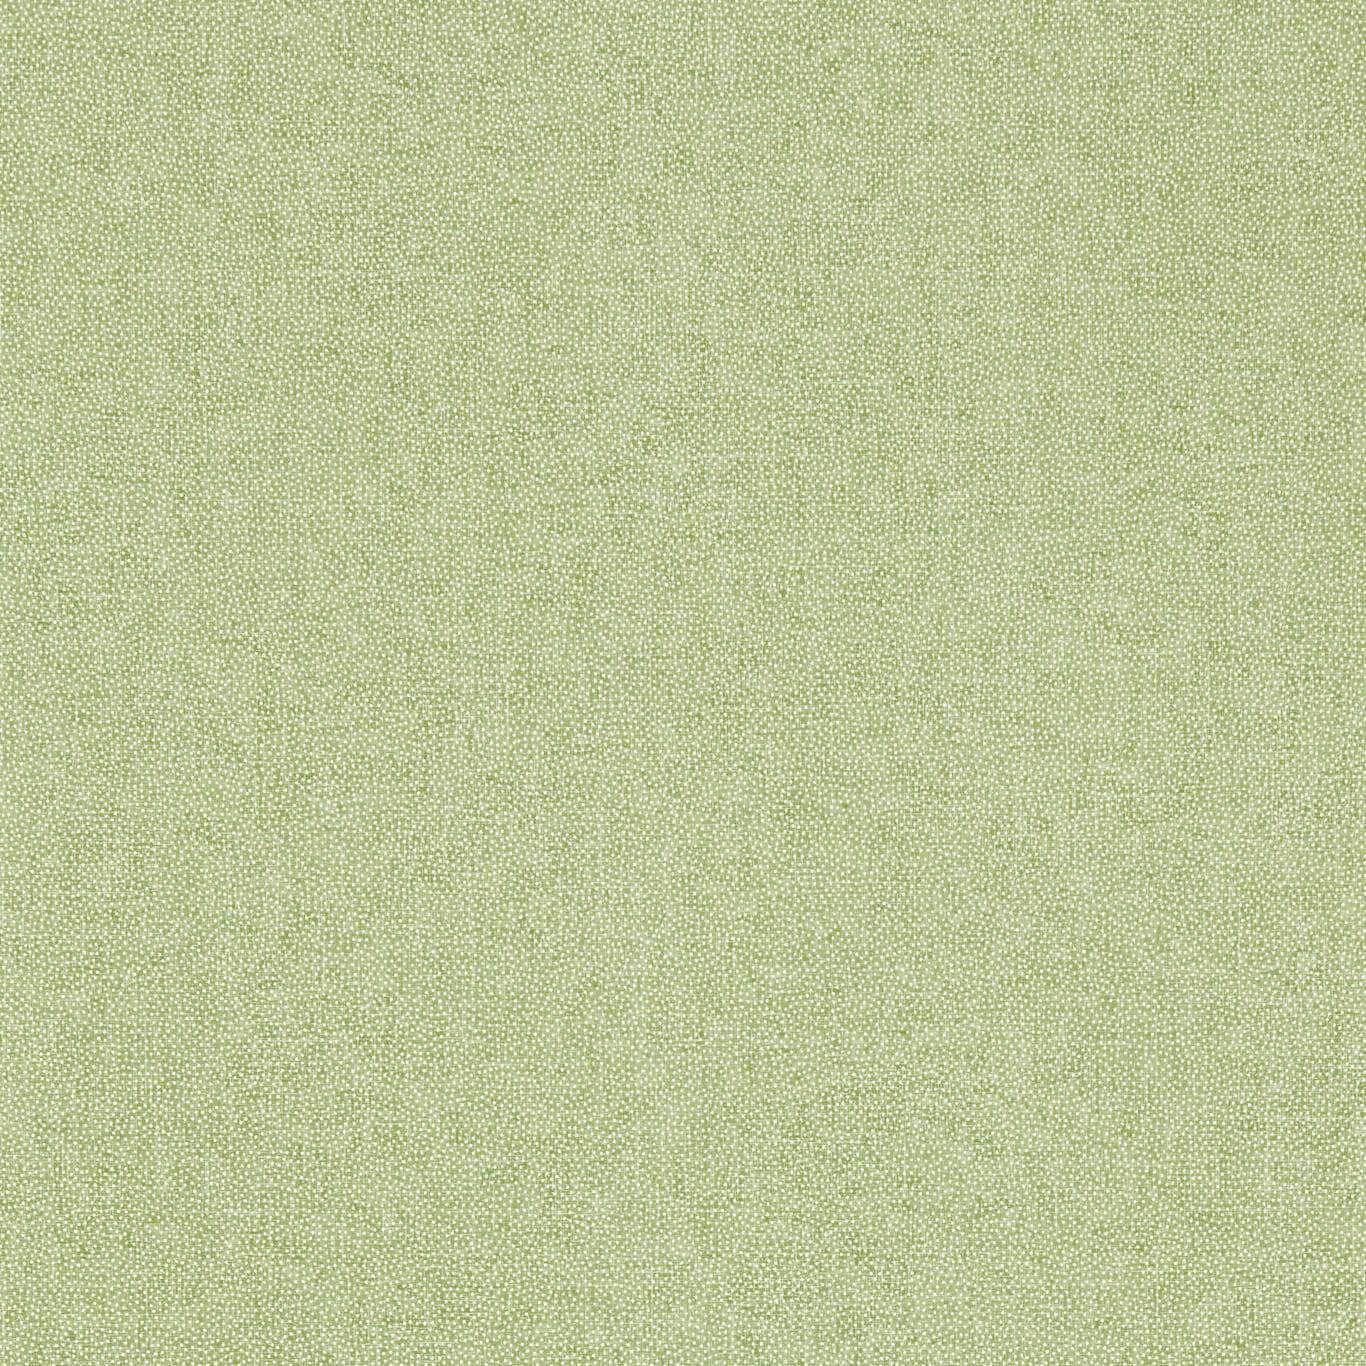 Sessile Plain Moss Green Wallpaper DABW217248 by Sanderson